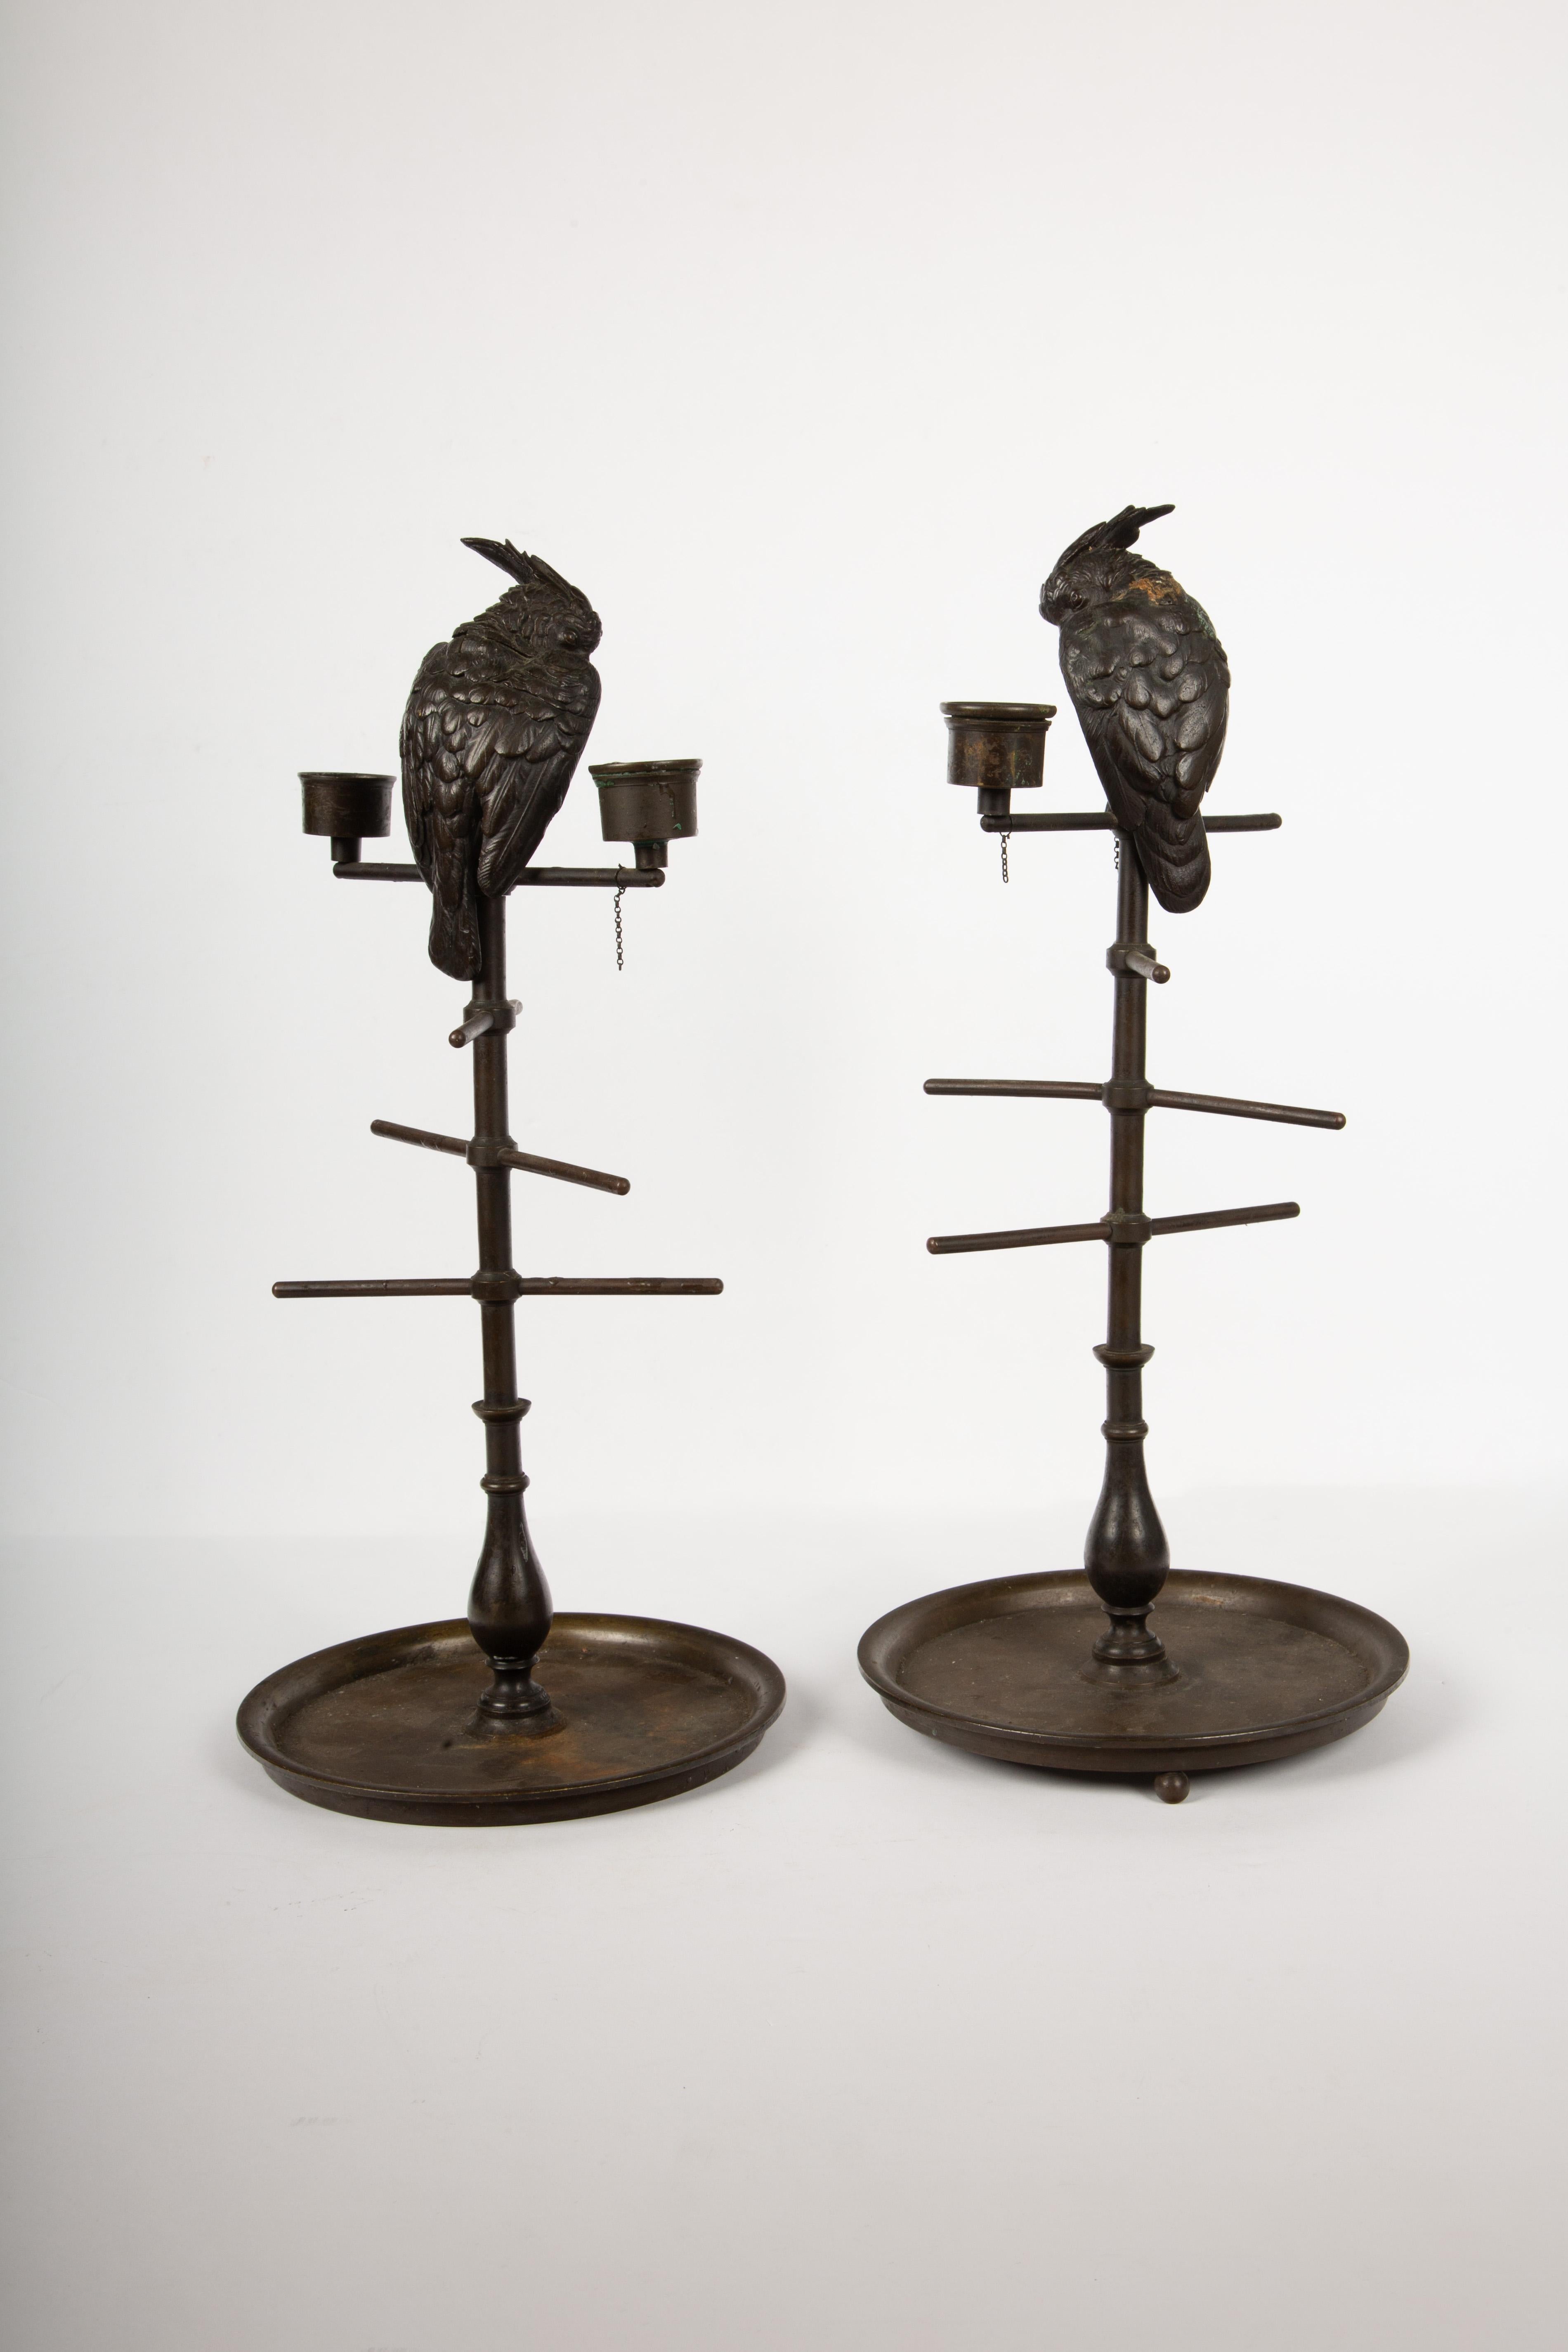 Bronze 19th Century Parakeet Perch Inkwell Candlesticks: Ink 'n' Perch Delight! For Sale